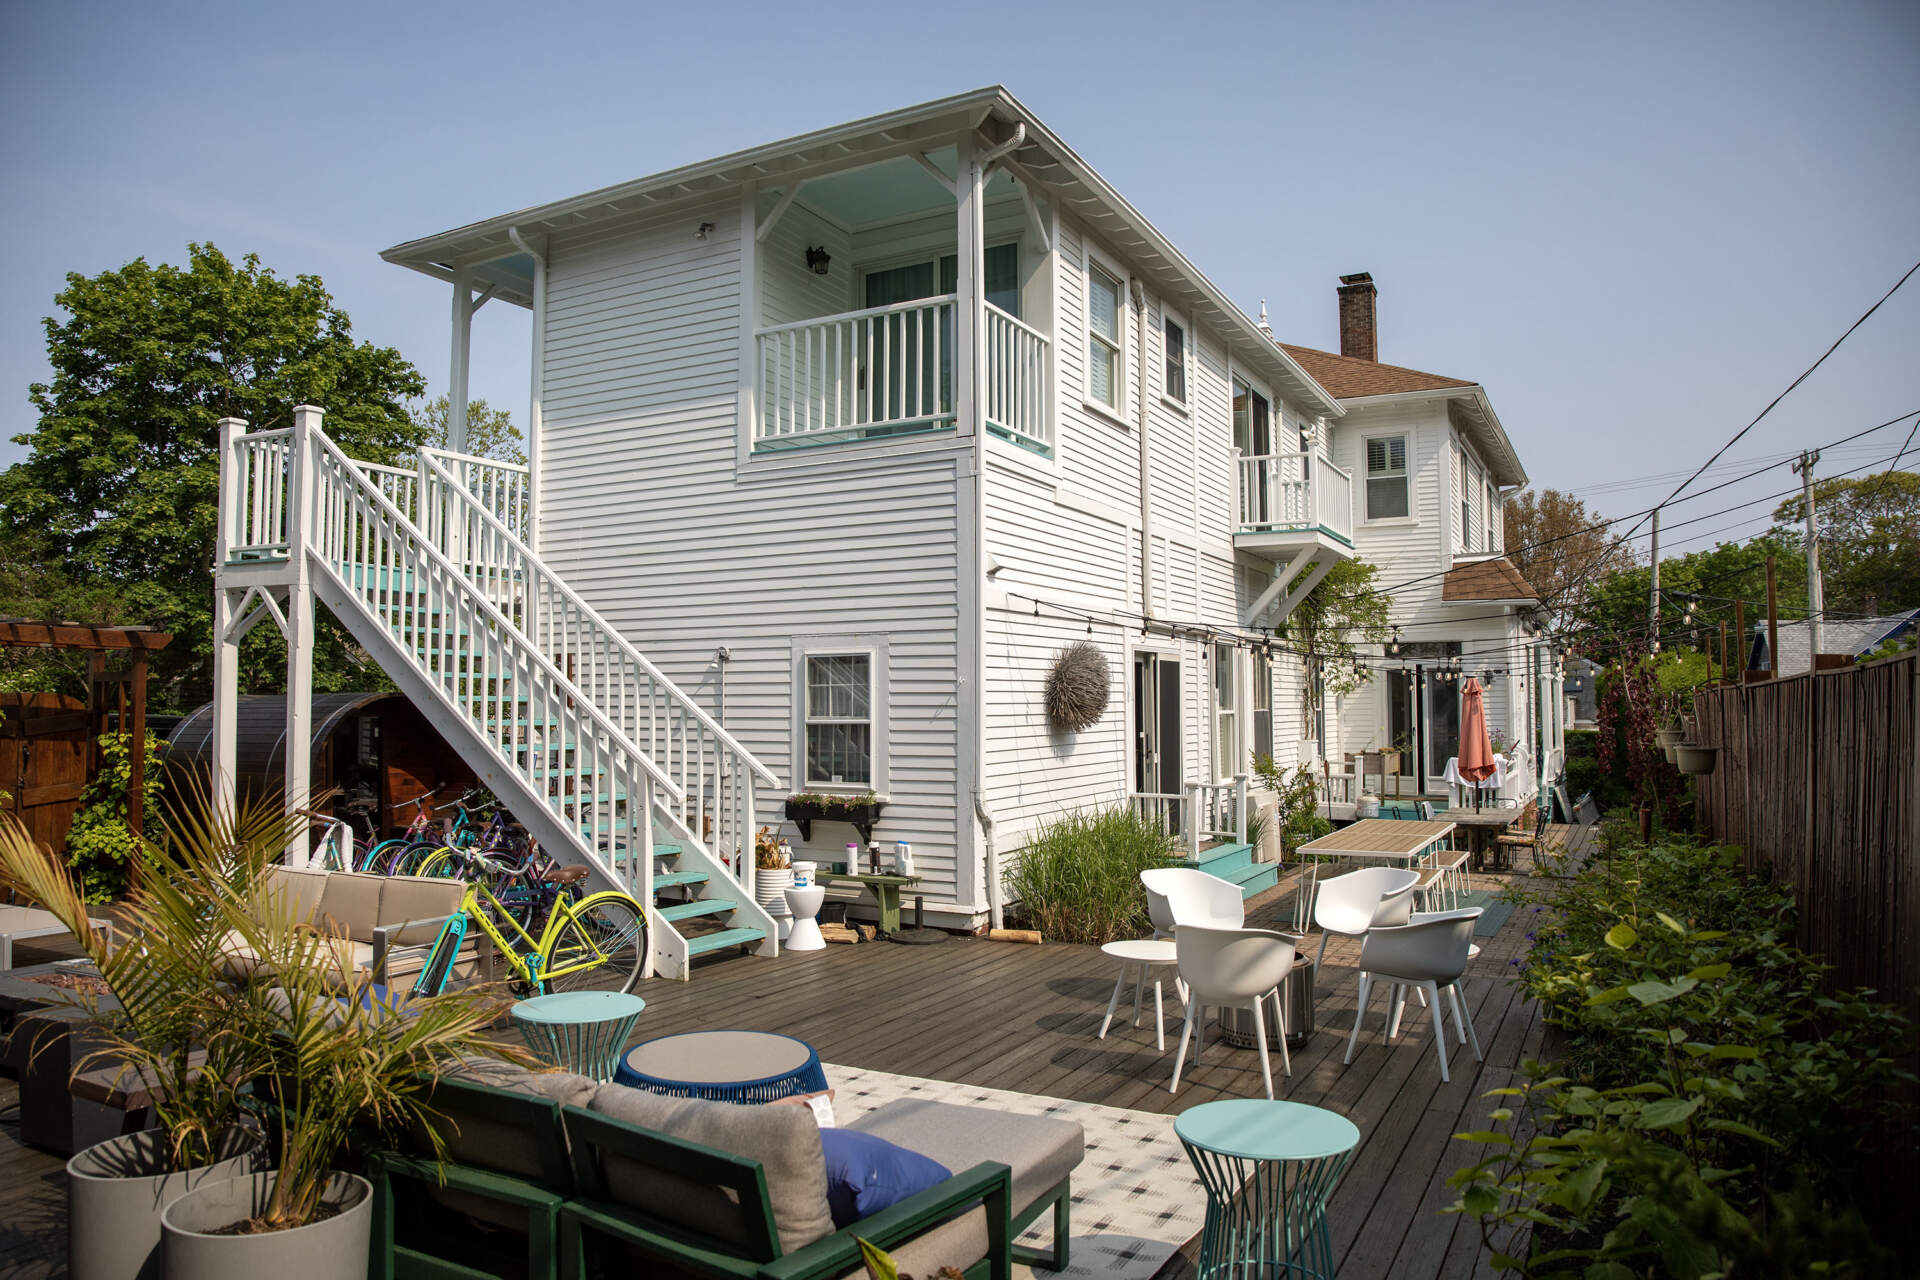 The deck in the backyard at the Summer of Sass house in Provincetown. (Robin Lubbock/WBUR)